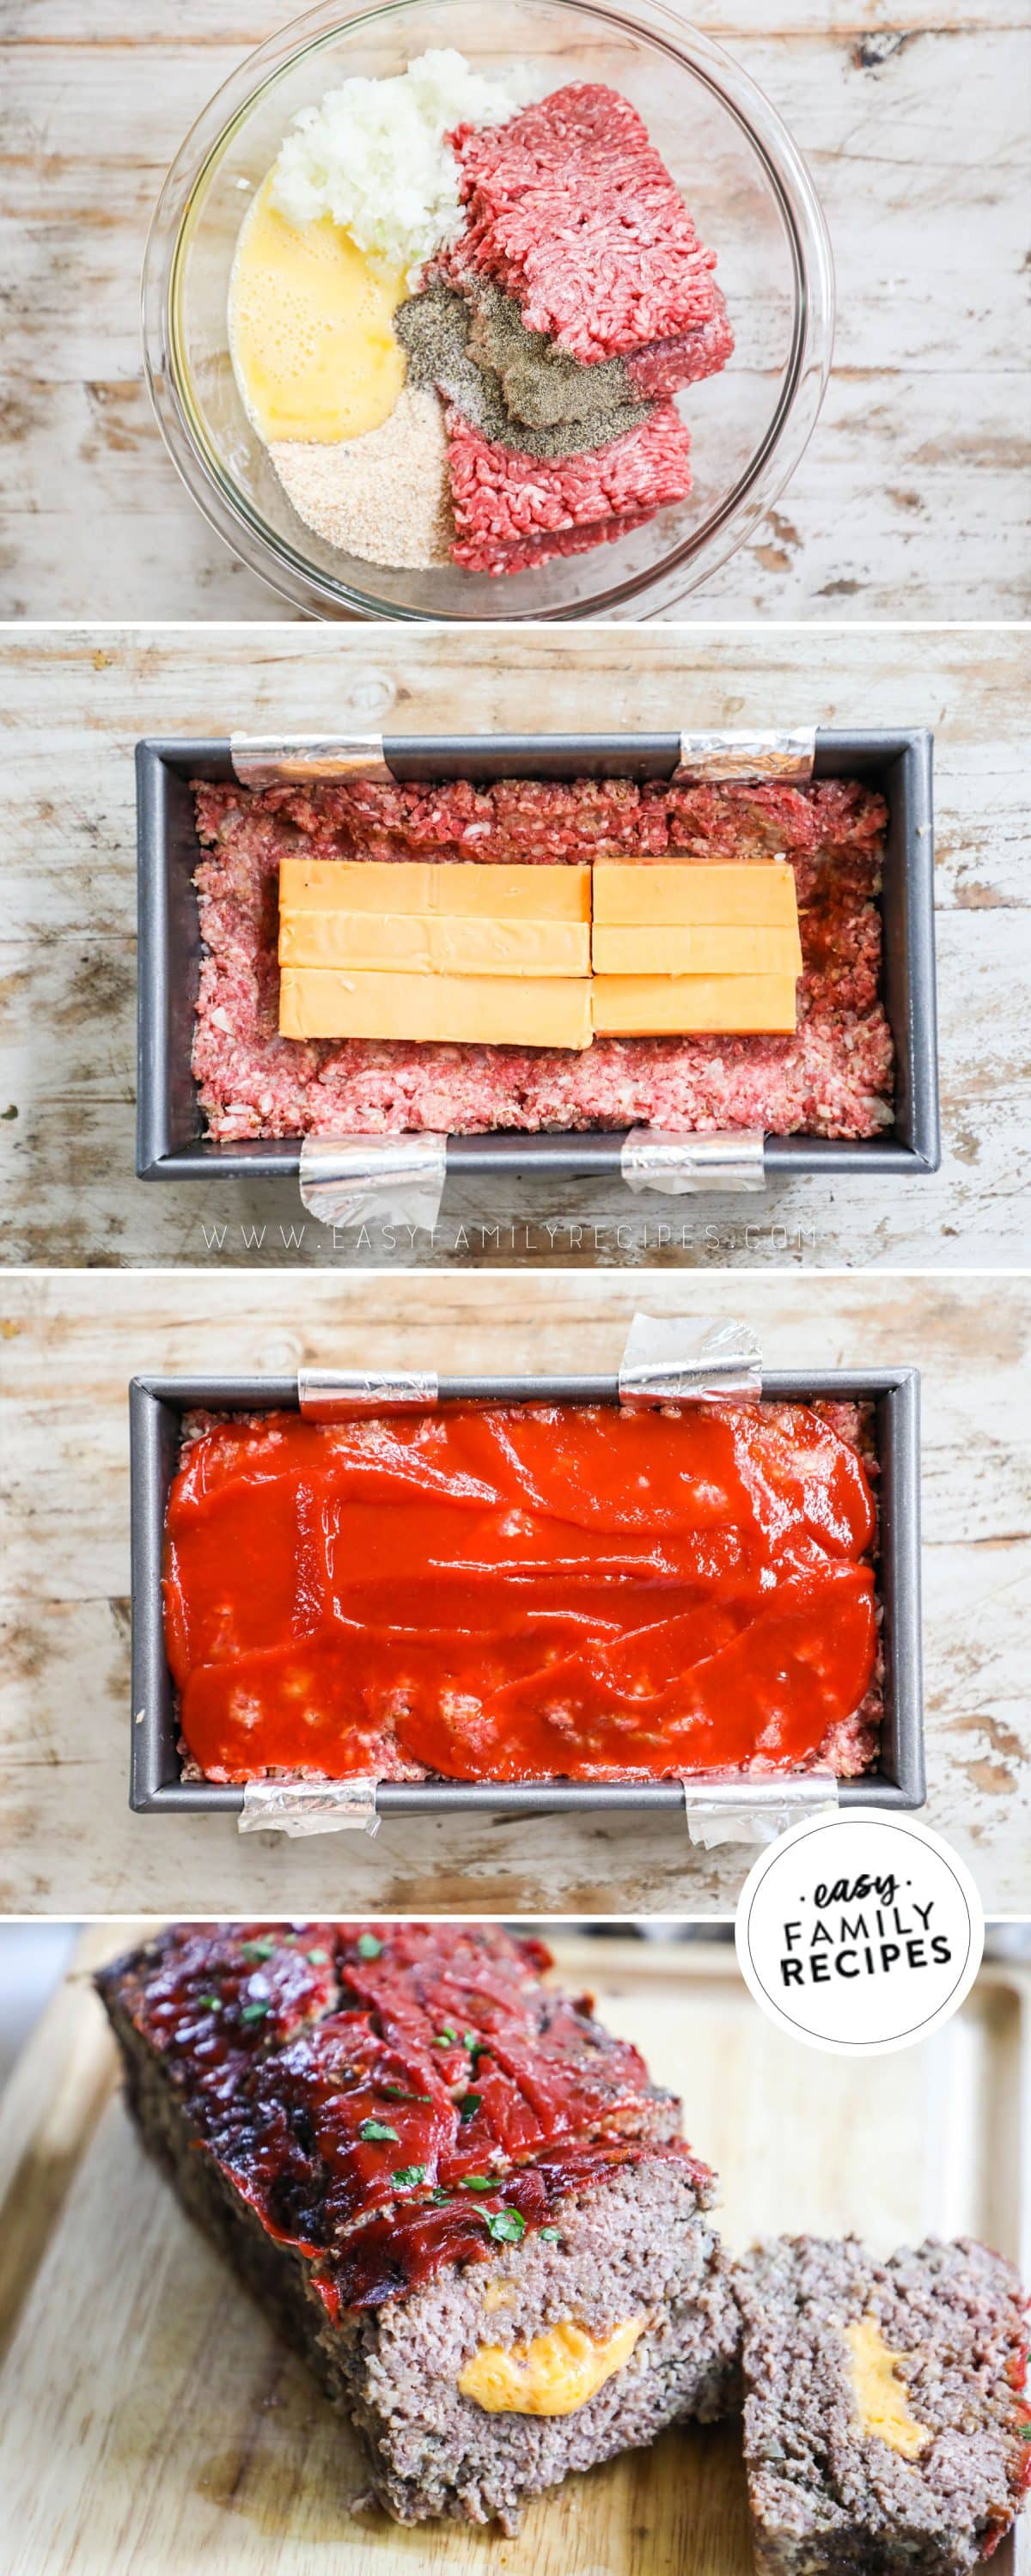 how to make cheeseburger meatloaf 1)mix beef 2)stuff with cheese 3)seal and glaze 4)bake and serve.